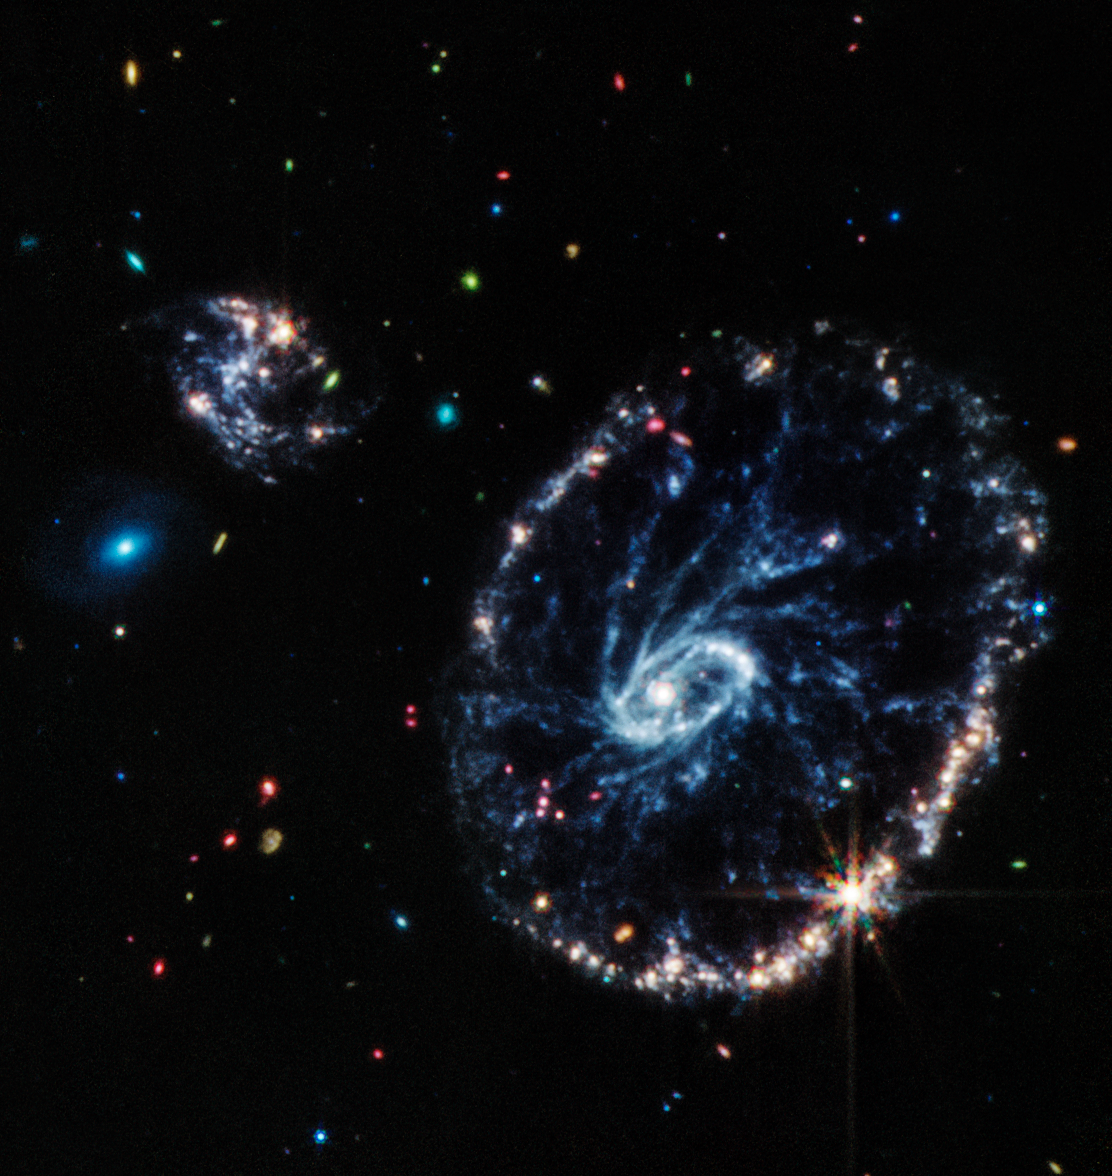 A large distorted ring-shaped galaxy (the Cartwheel) is illustrated in this image from the Mid-Infrared Instrument (MIRI) on Webb. Credits: NASA, ESA, CSA, STScI.